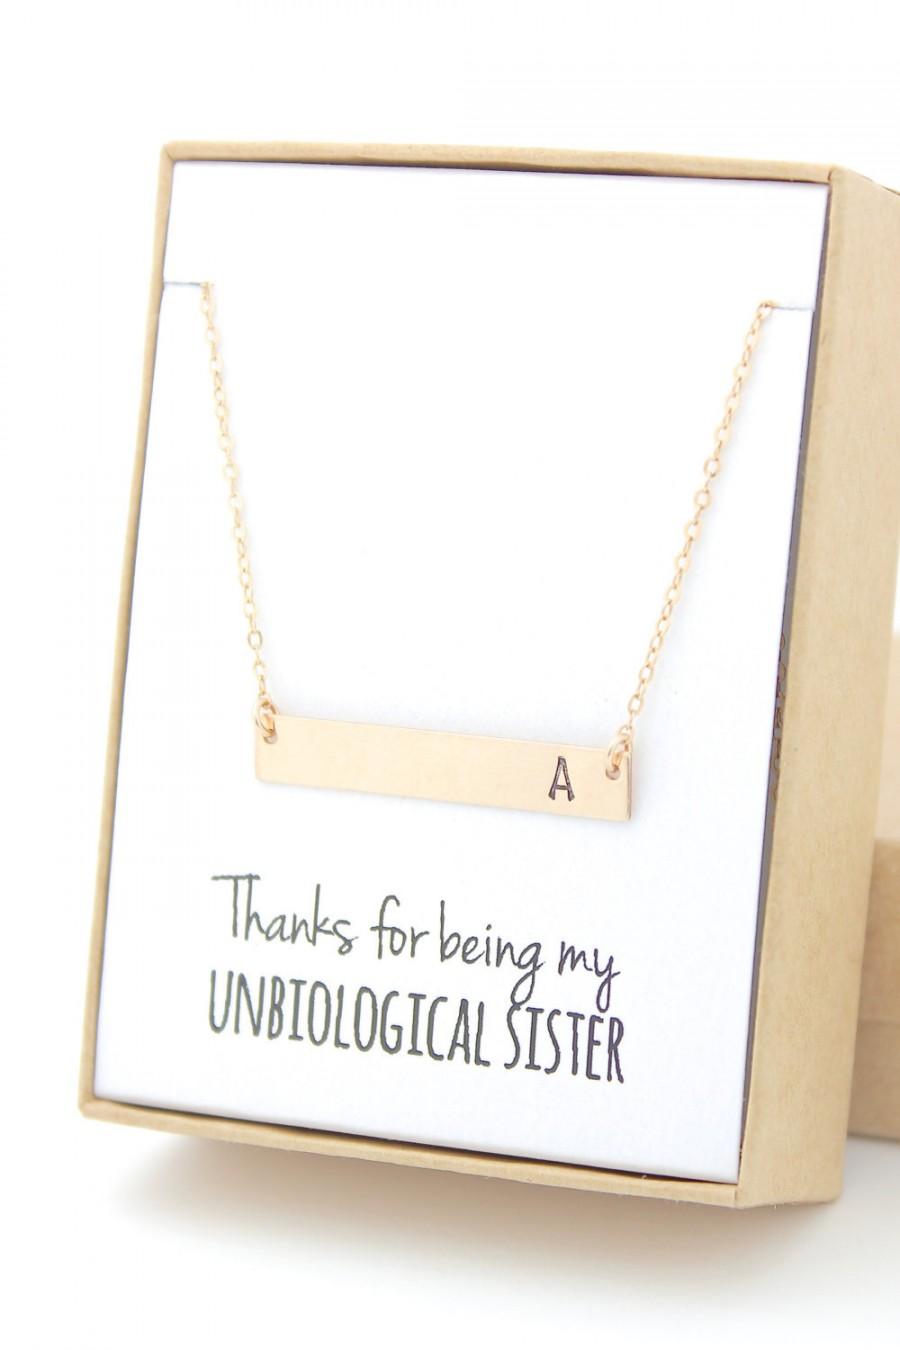 Hochzeit - Gold Bar Necklace - Bridesmaid Gift Jewelry - Thanks for Being My Unbiological Sister - Wedding Party - Bridal Party Gifts - Initial Letter